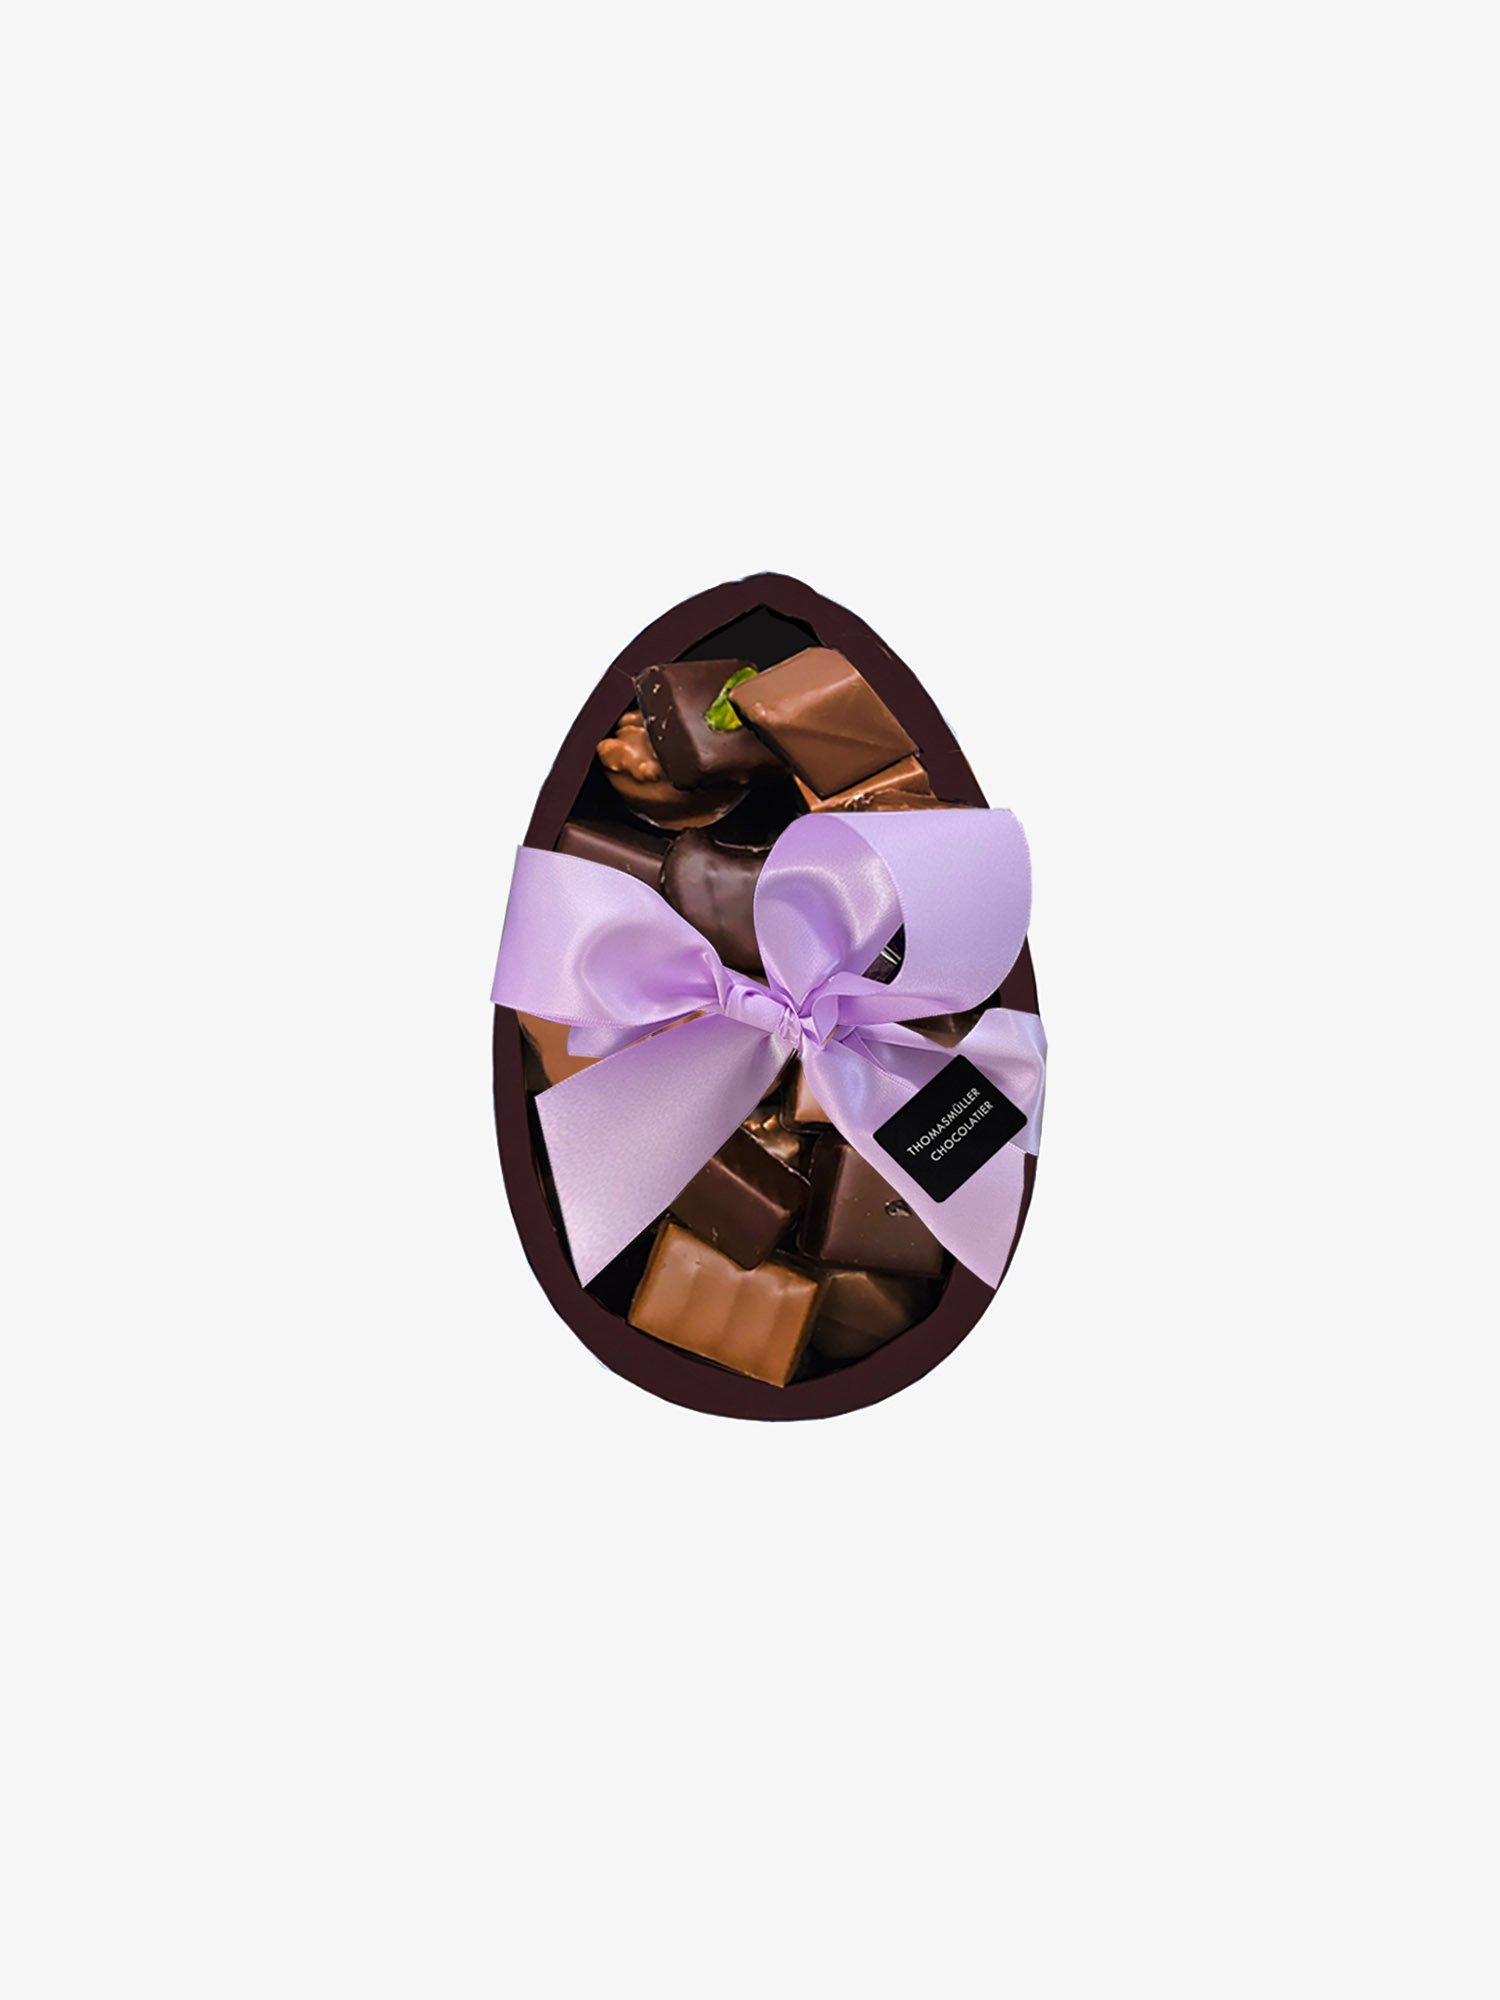 Discover Easter Eggs by Chocolatier Thomas Müller